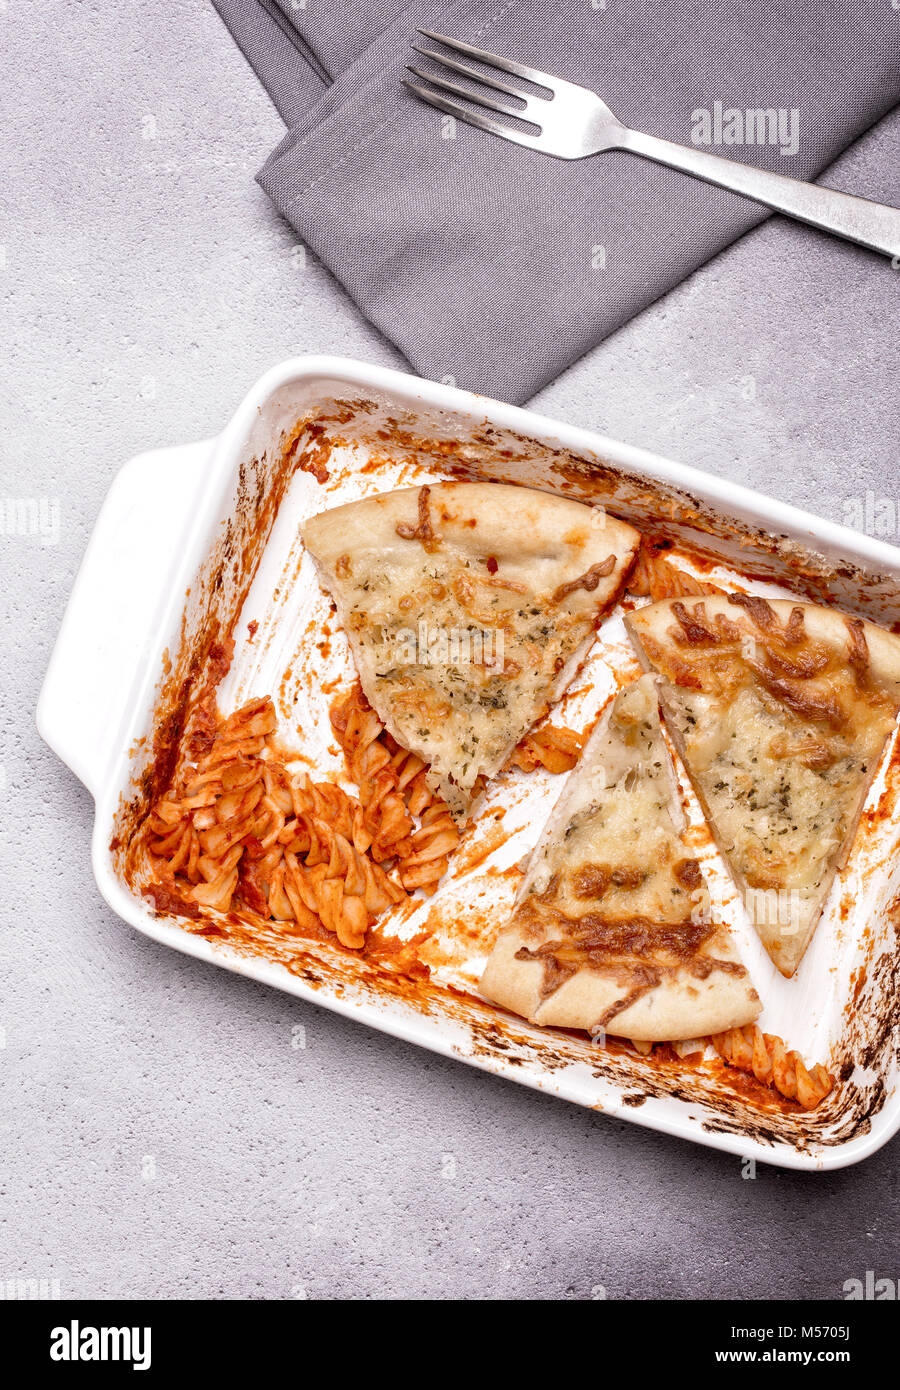 Dish of leftover pasta and cheesy garlic bread with a fork and napkin on a grey rustic background Stock Photo